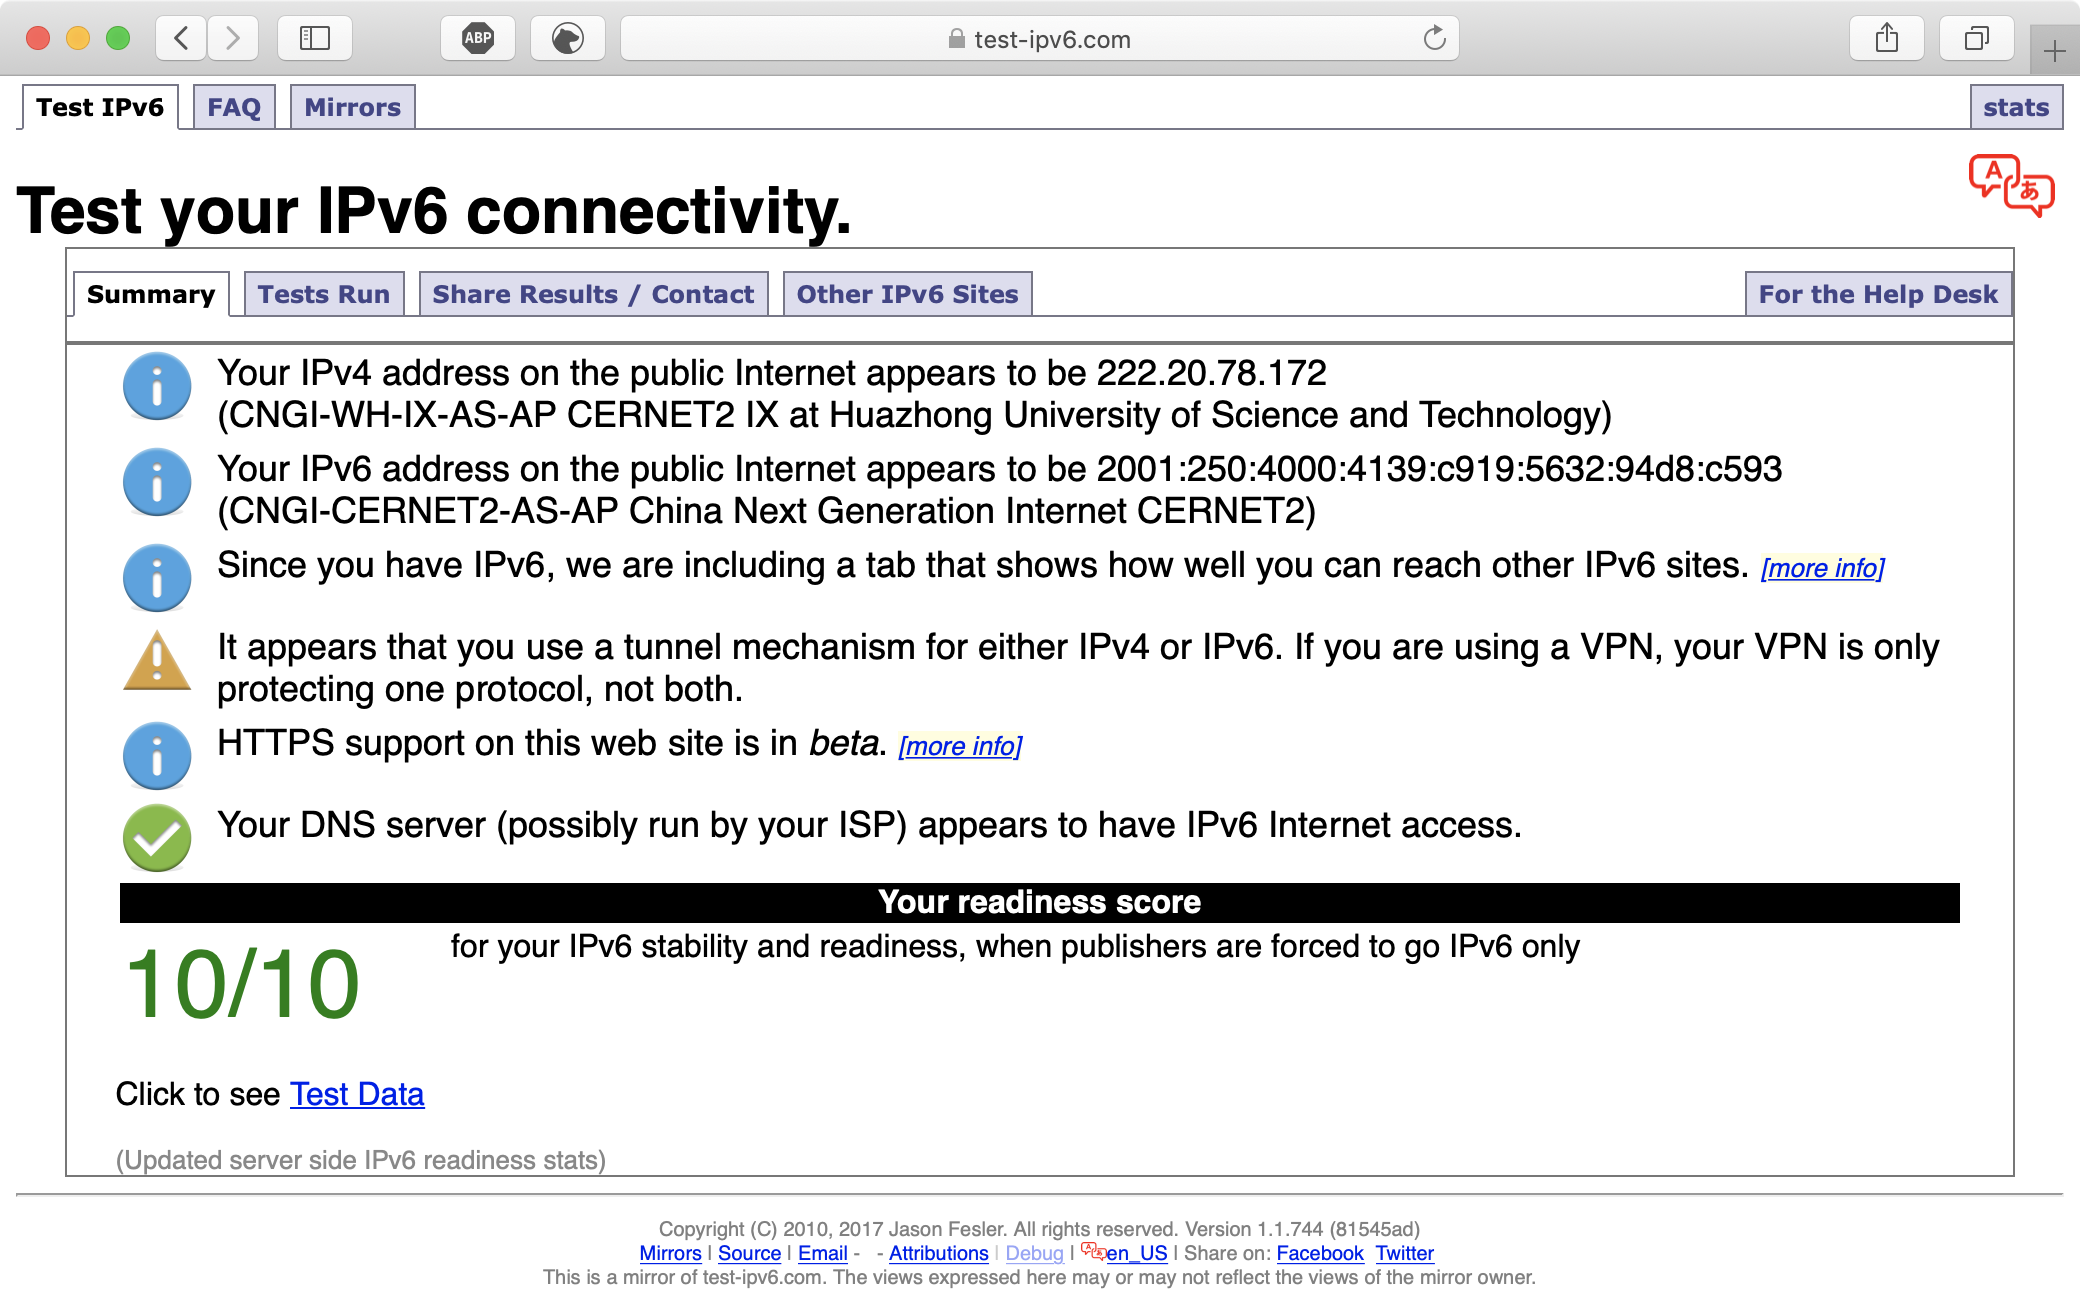 Result of IPv6 connectivity test